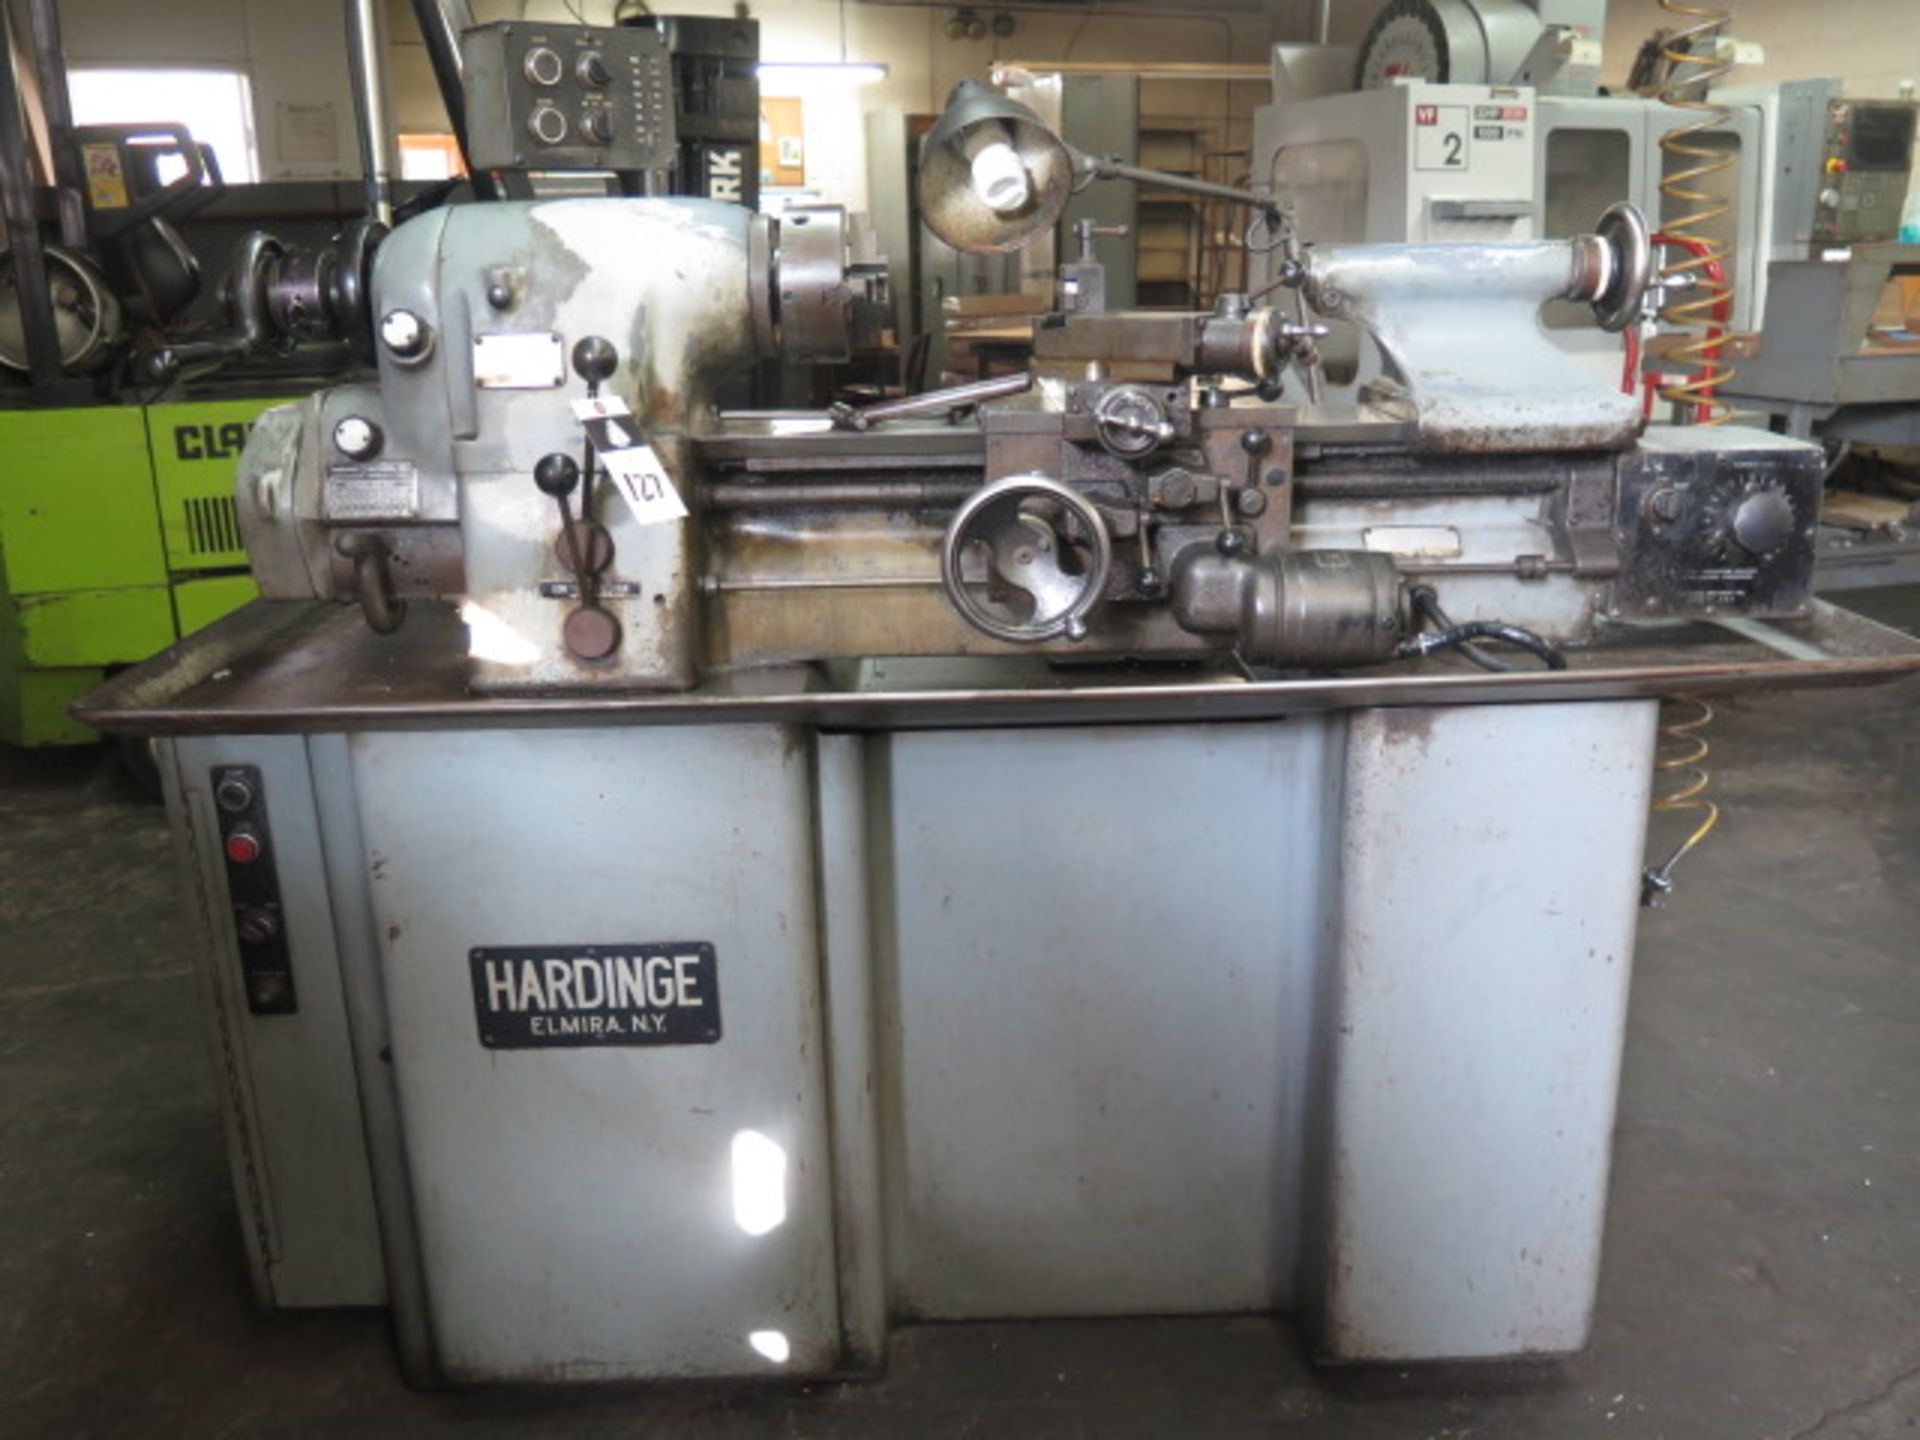 Hardinge HLV-H Tool Room Lathe s/n HLV-H-3244 w/ 125-3000 RPM, Inch Threading, Tailstock, SOLD AS IS